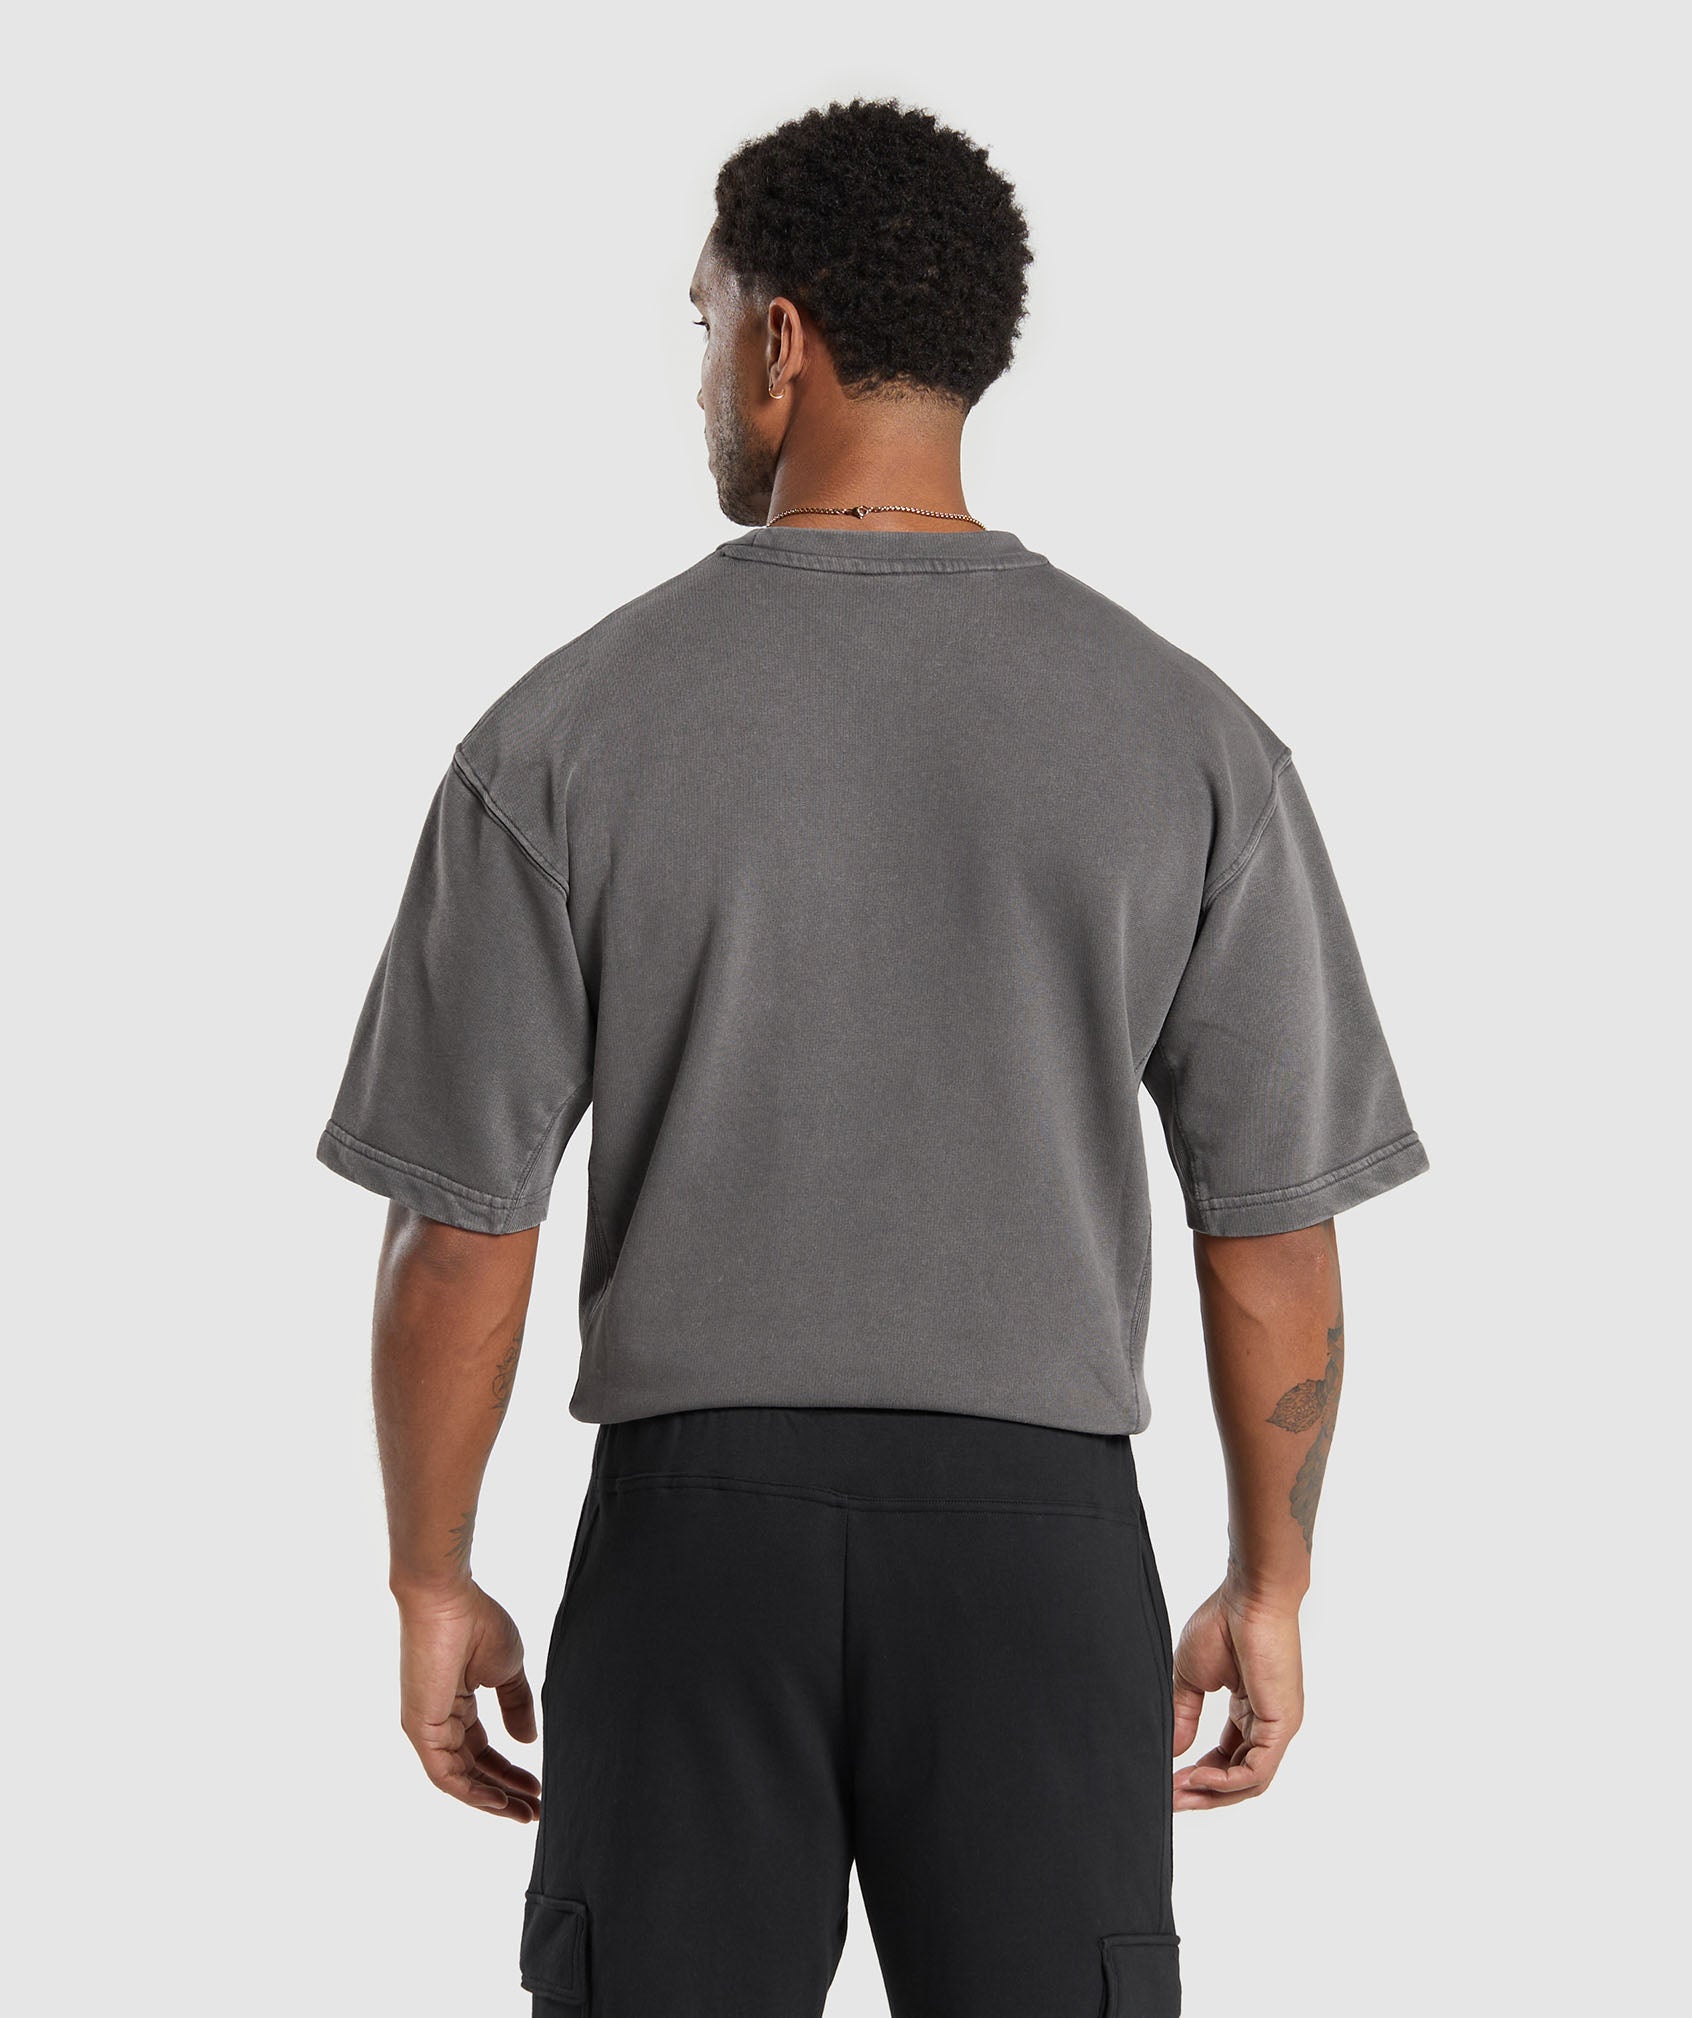 Power Washed Short Sleeve Crew in Onyx Grey - view 2